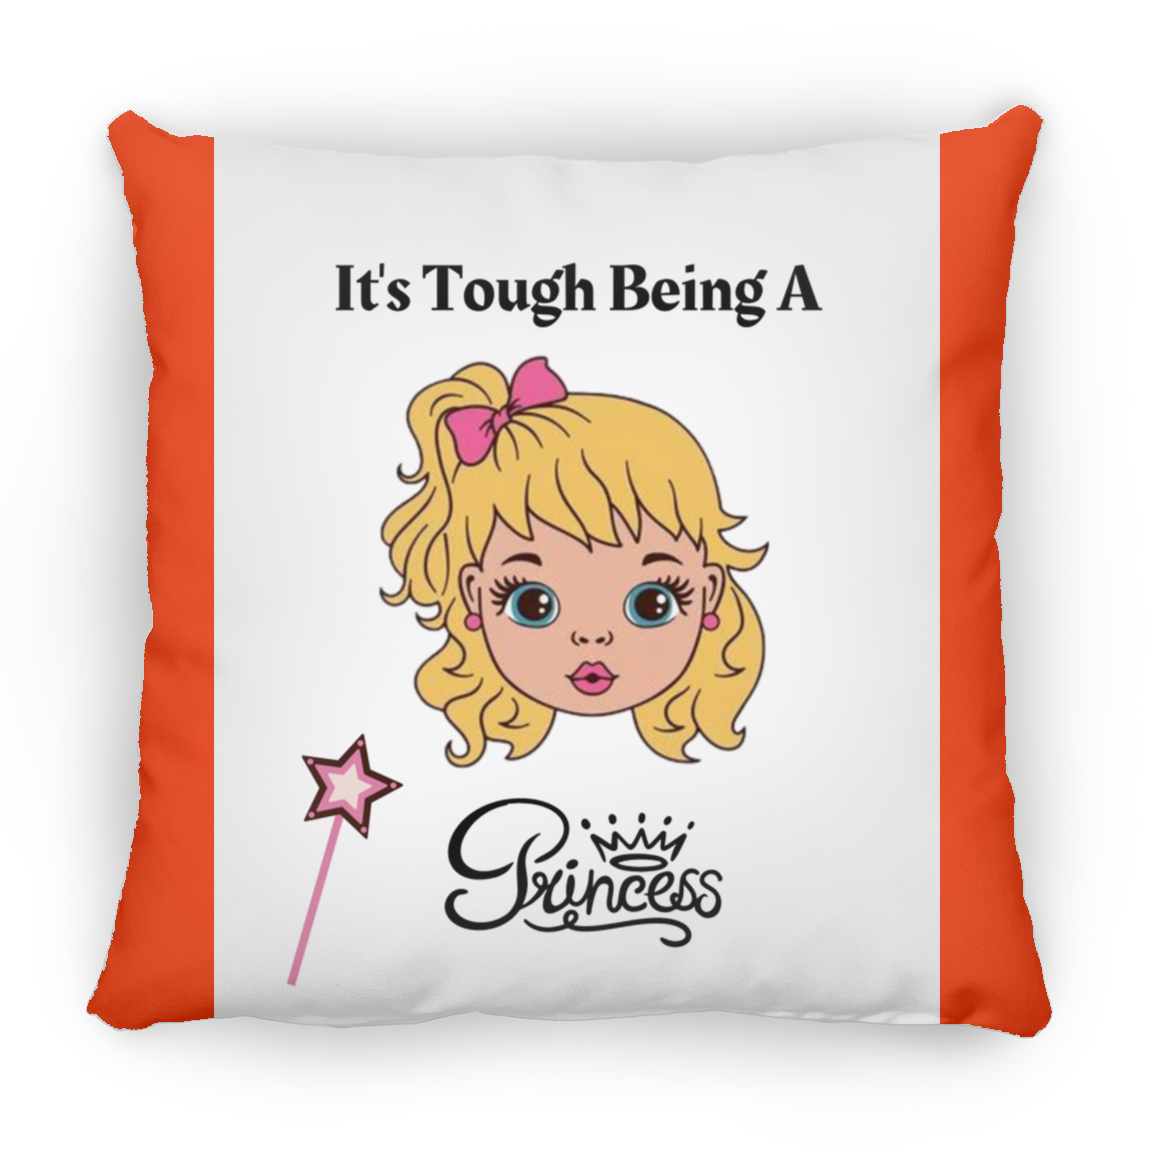 It's Tough Being A Princess Large Square Pillow